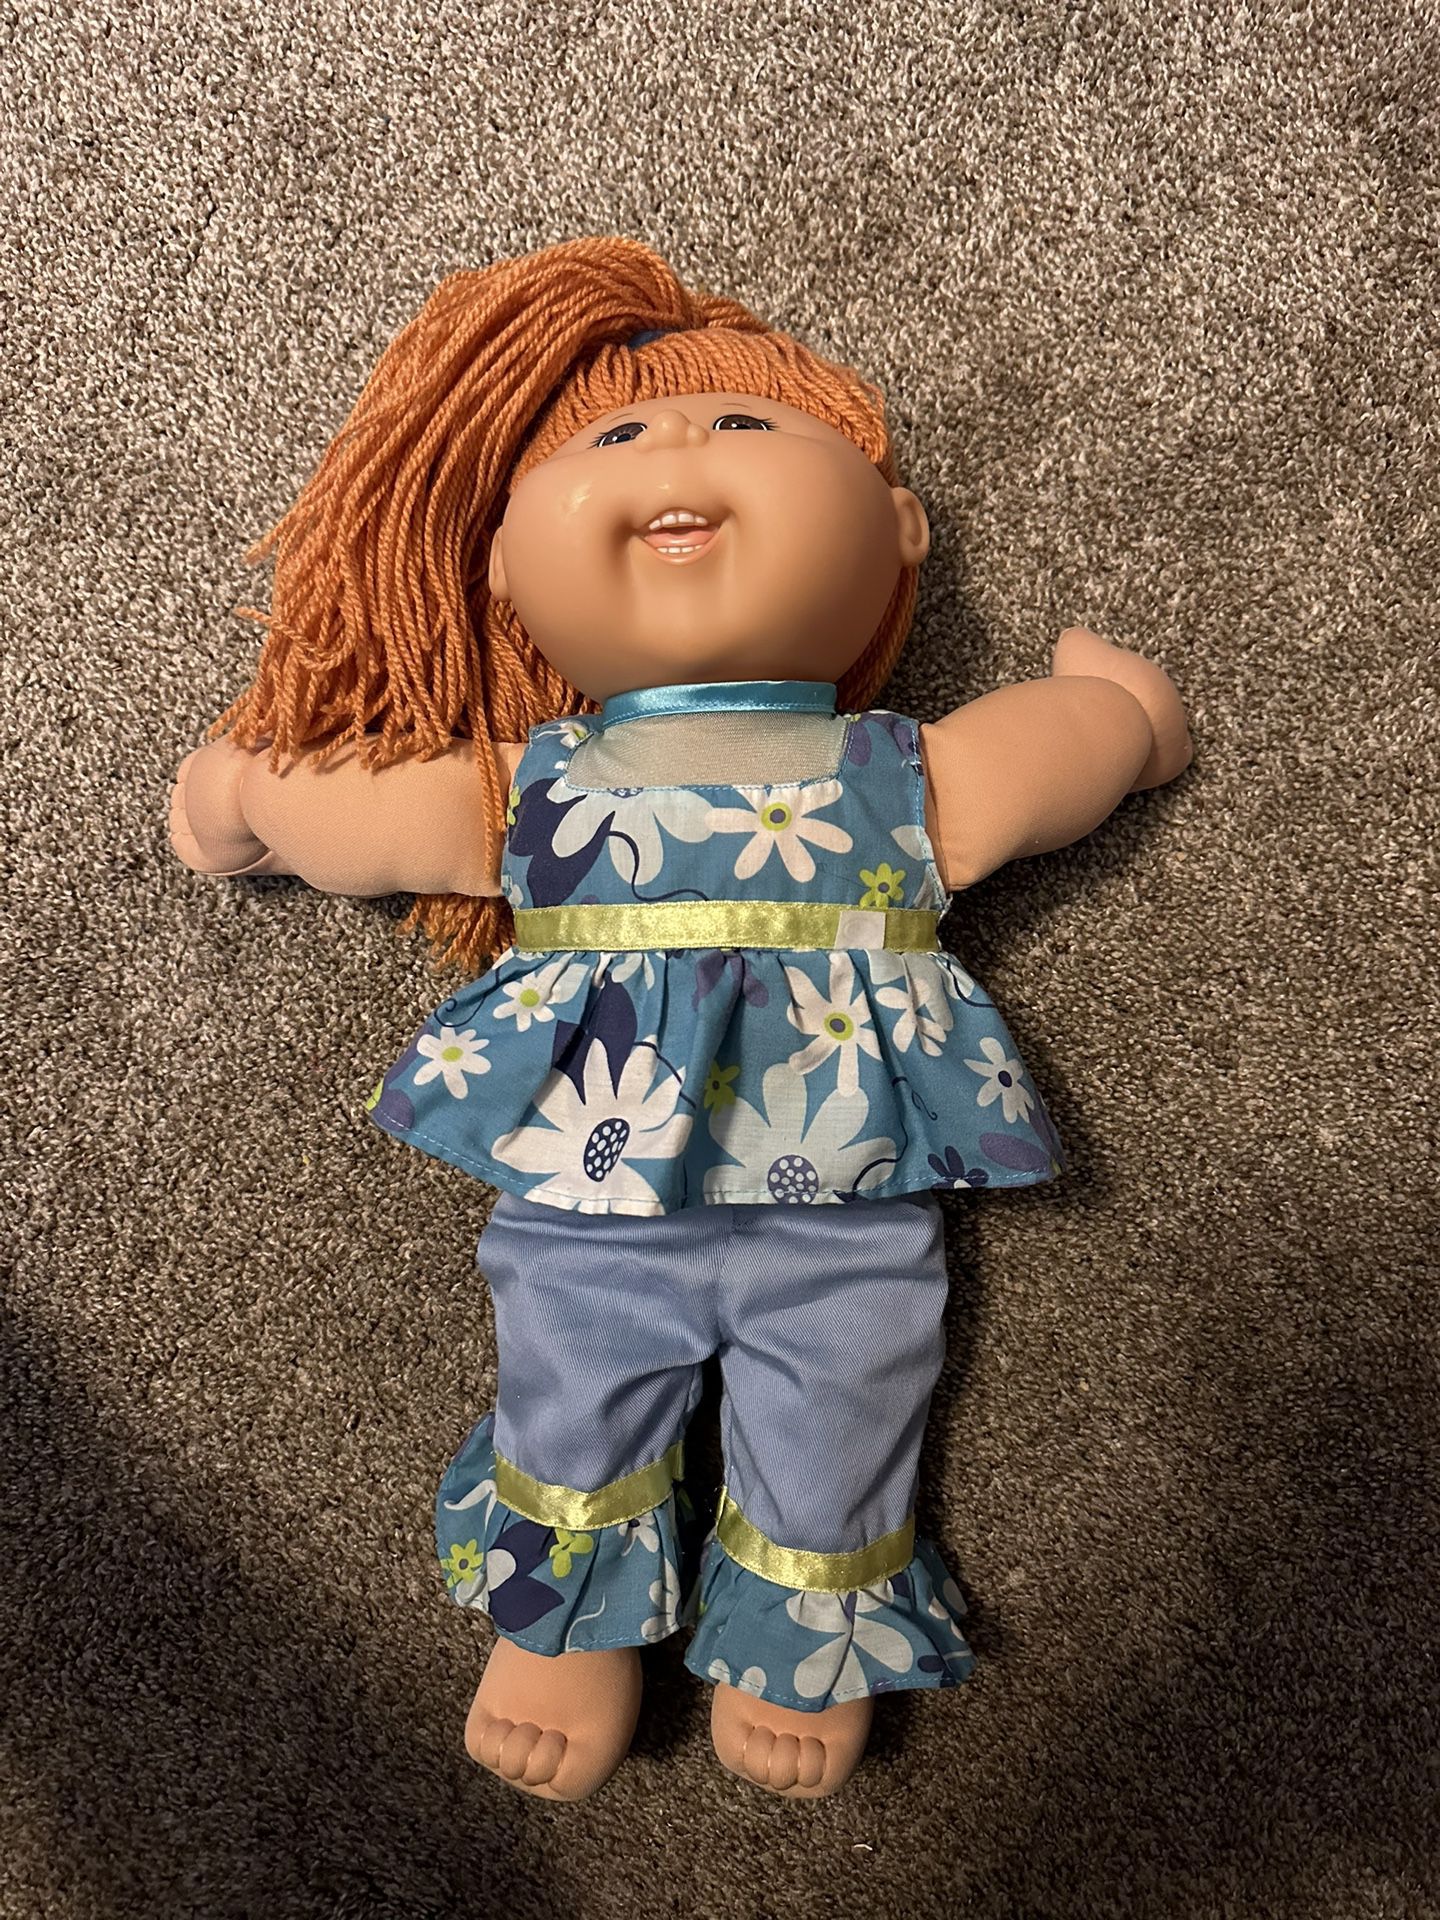 Cabbage Patch 2004 Play Along Doll Pre Loved/owned Red Hair Teeth